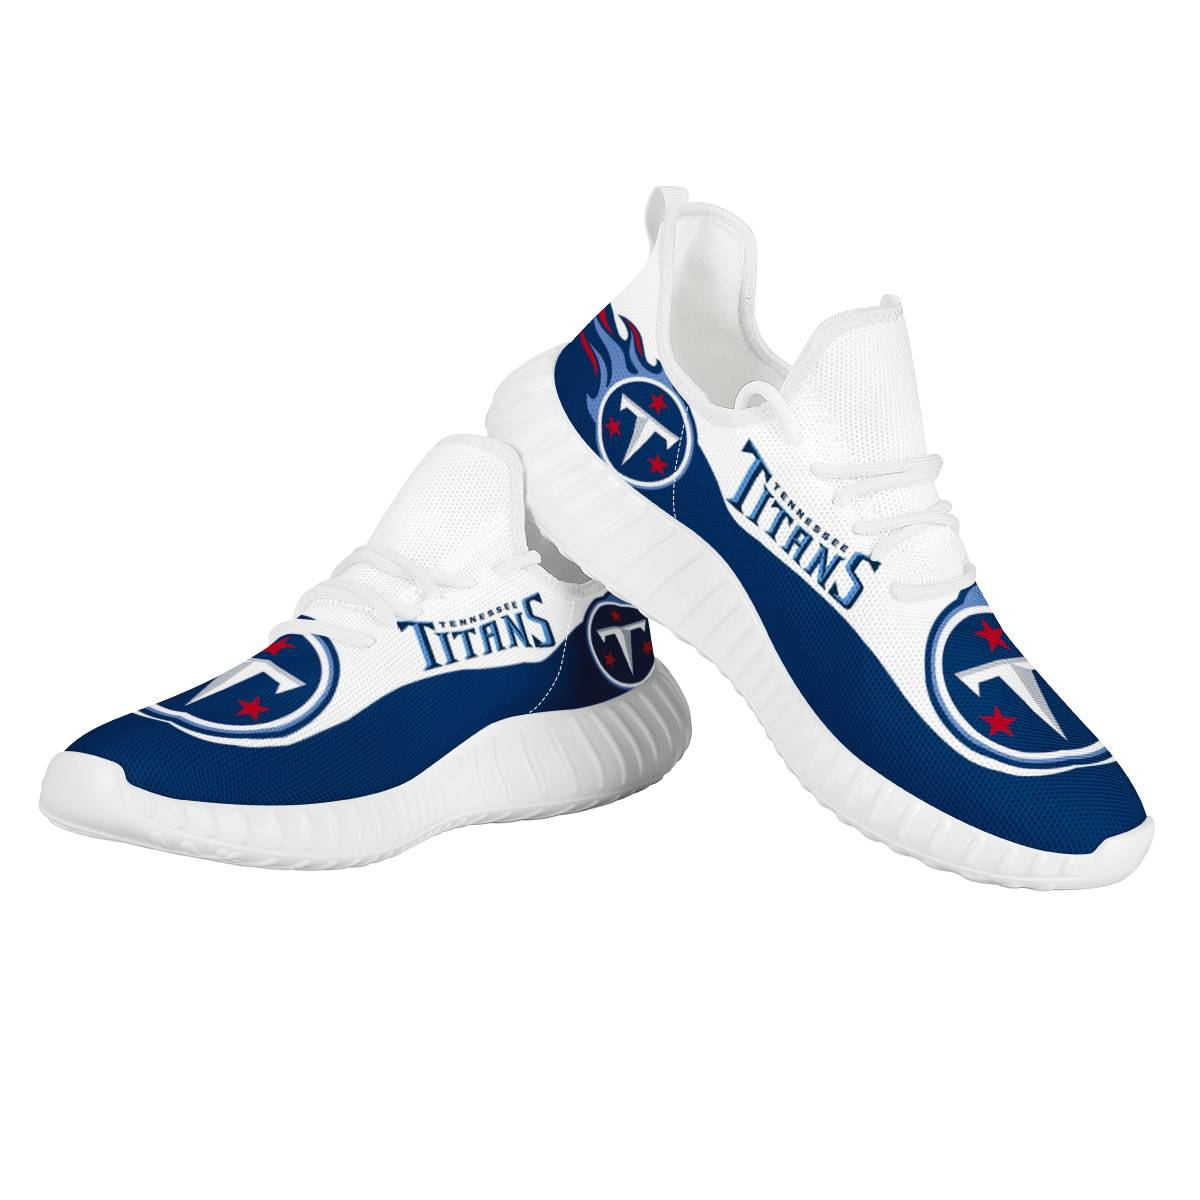 Women's Tennessee Titans Mesh Knit Sneakers/Shoes 004